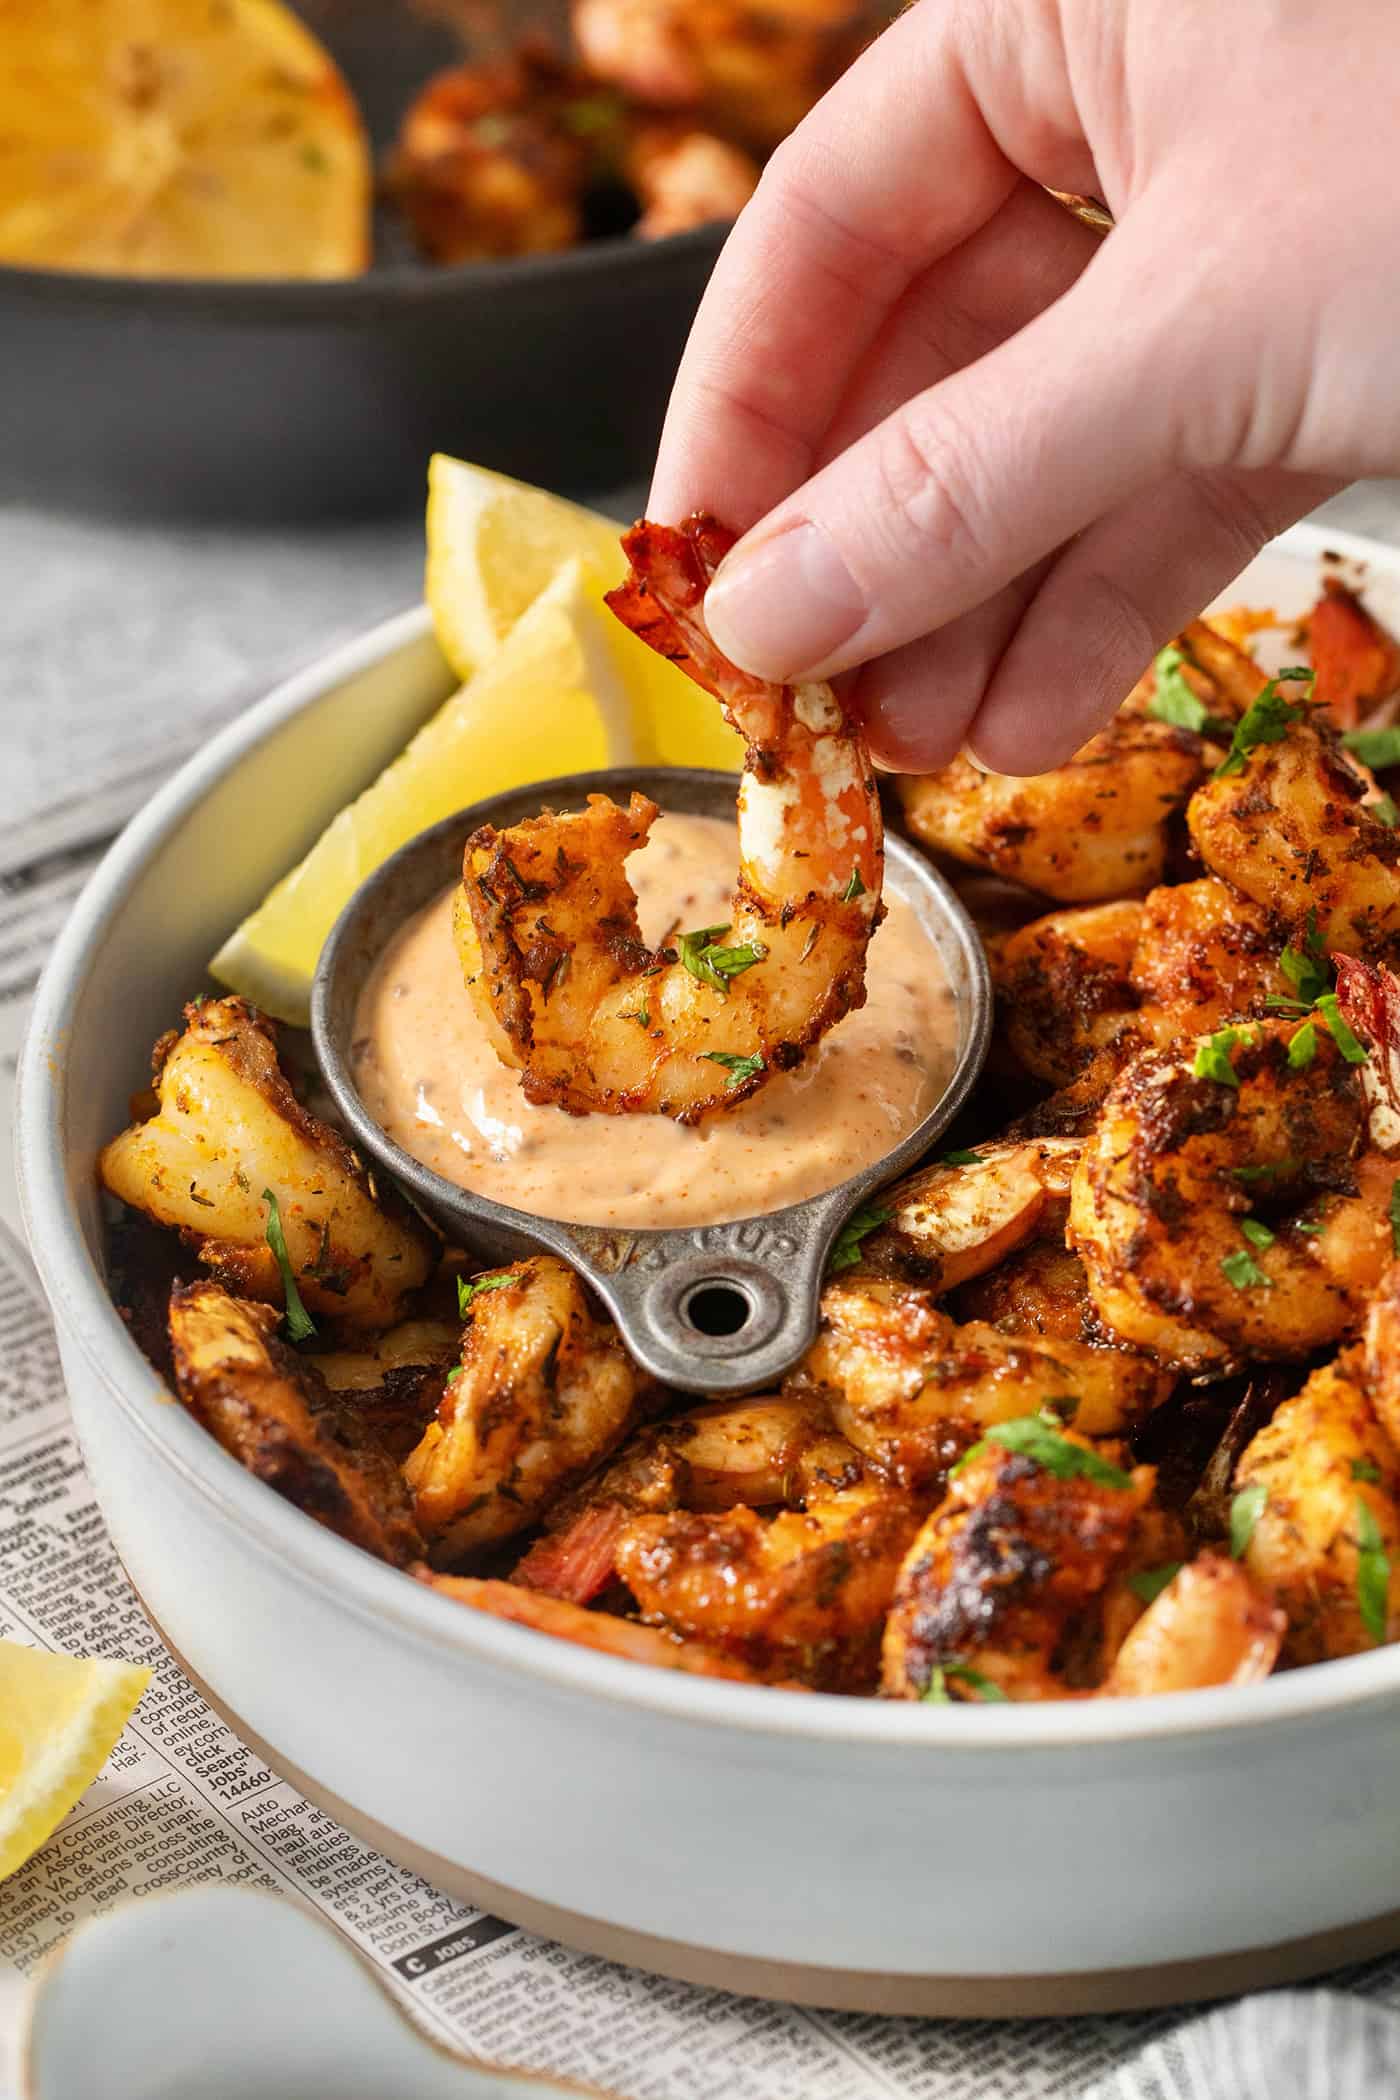 A hand dips a piece of blackened shrimp into a bowl of sauce.